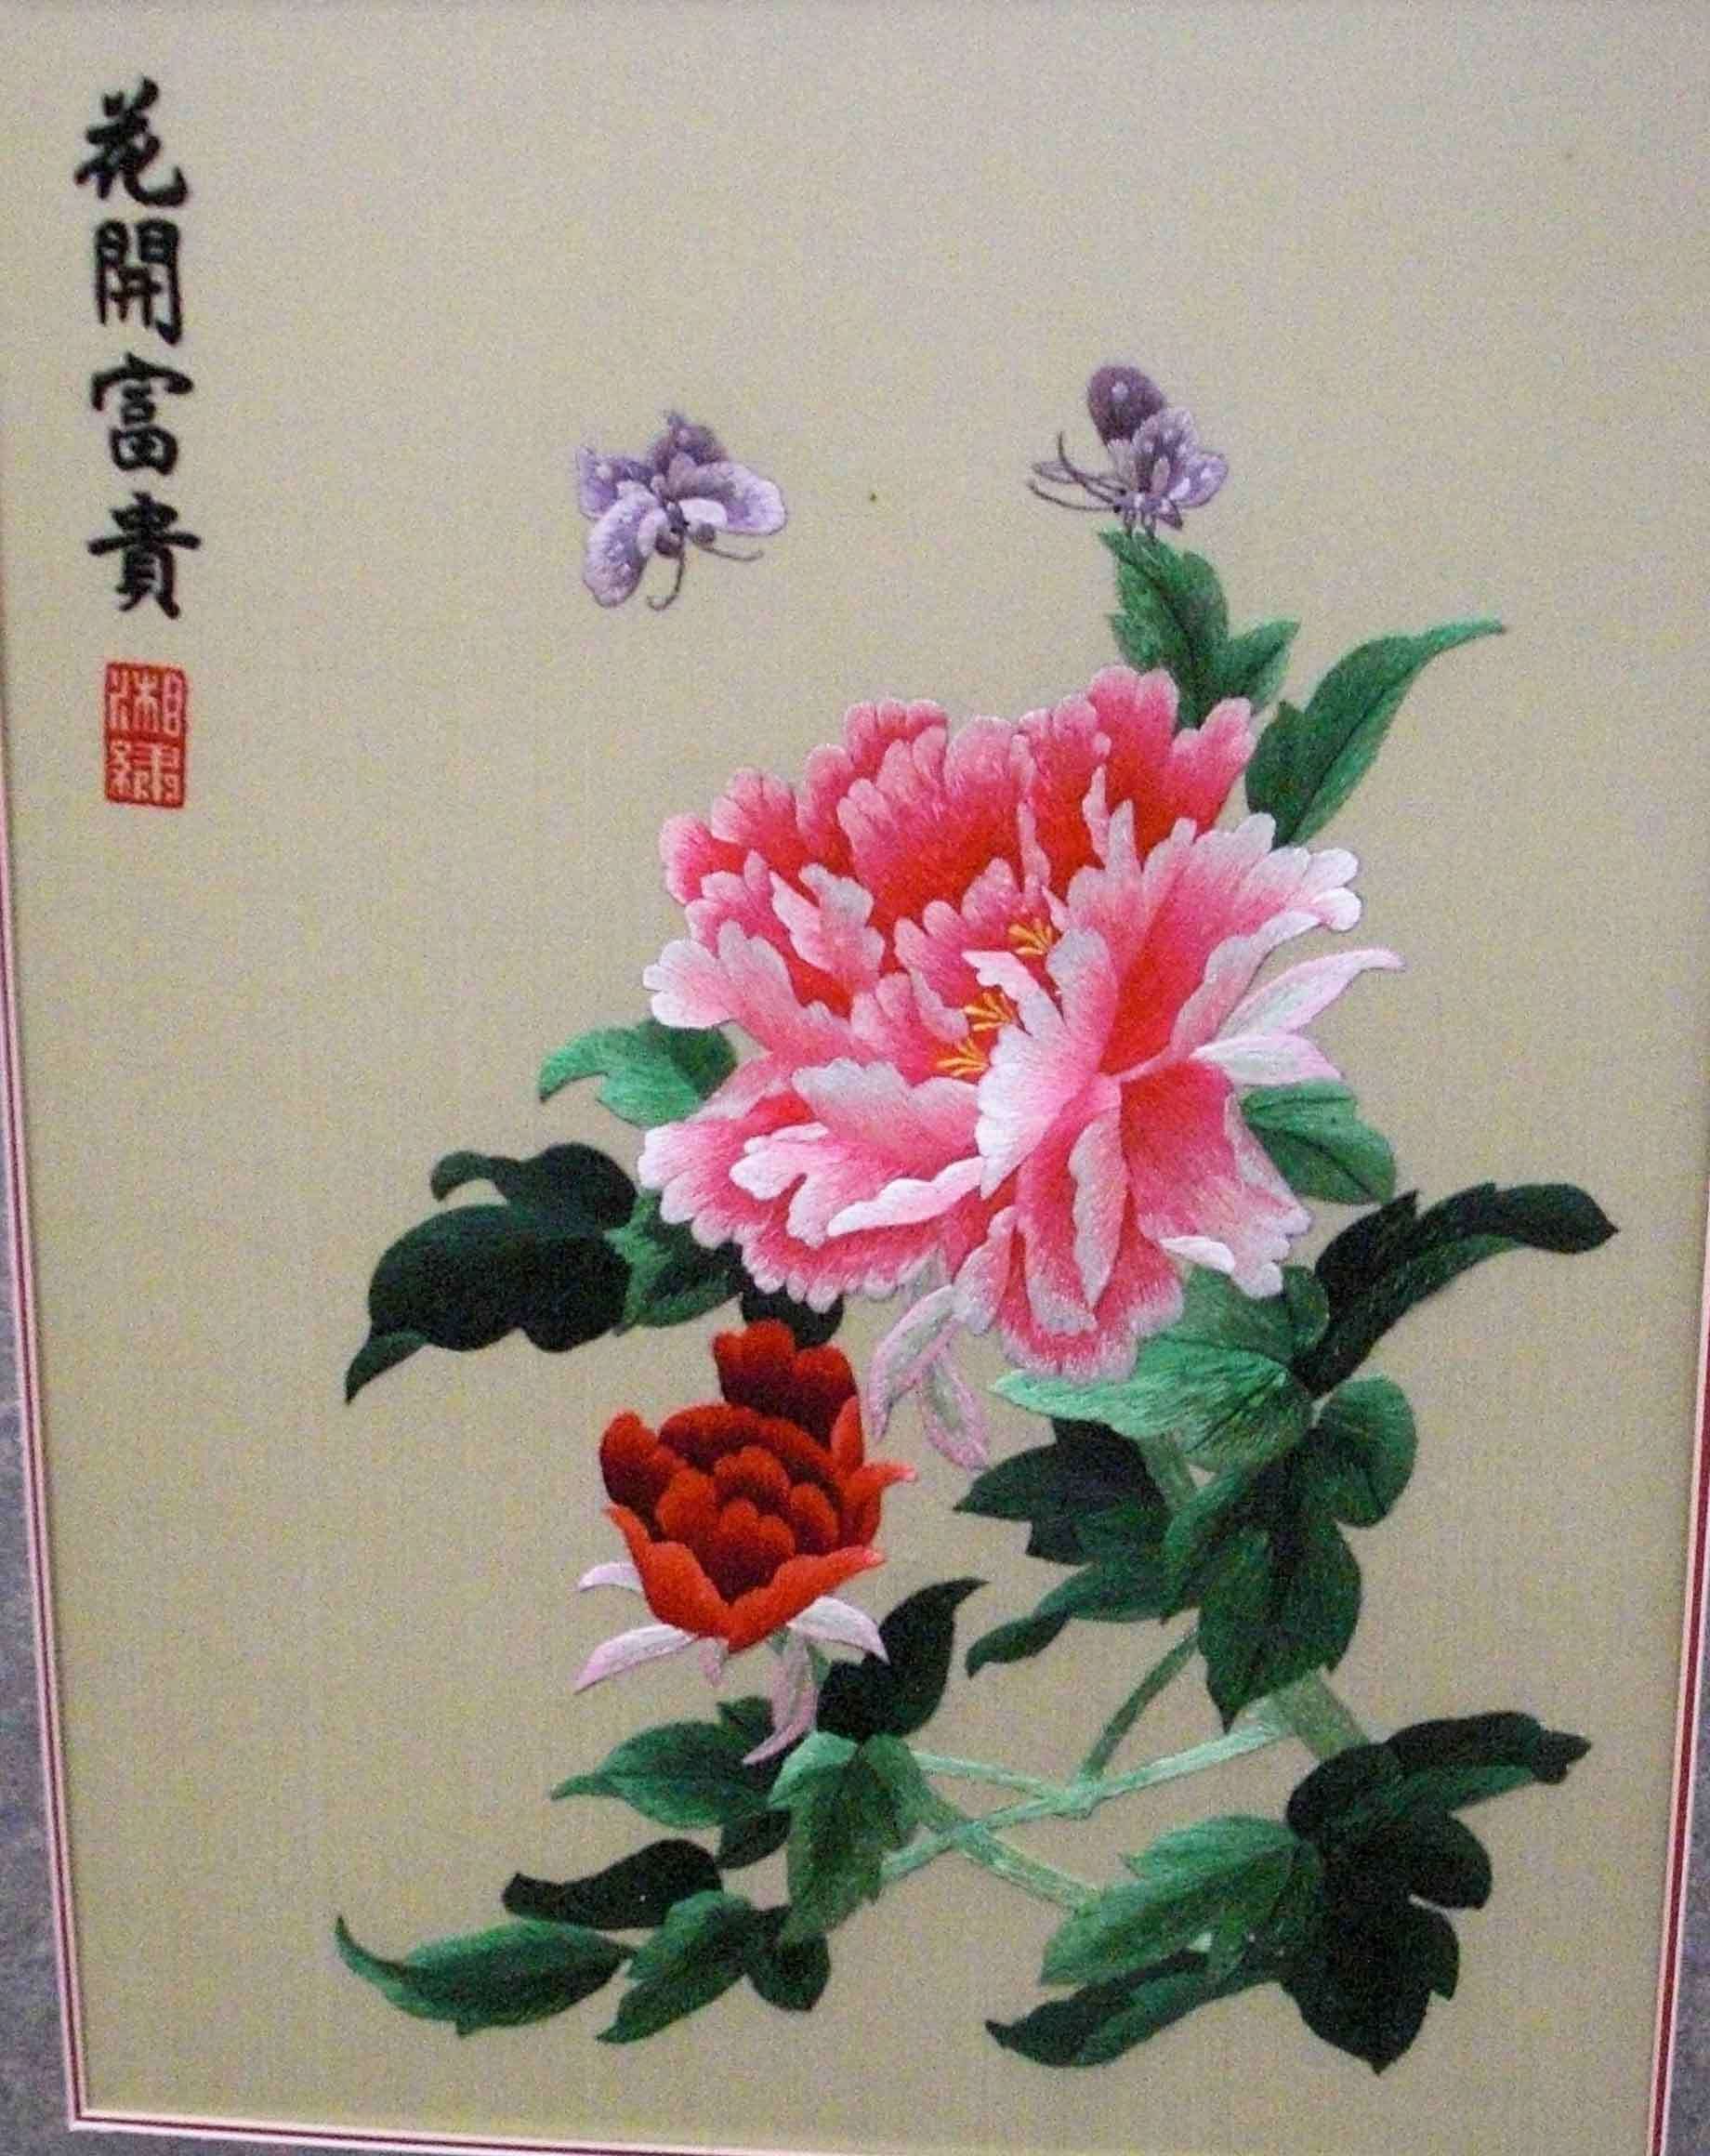 Traditional Chinese embroidery | Folk art, Folk and Embroidery